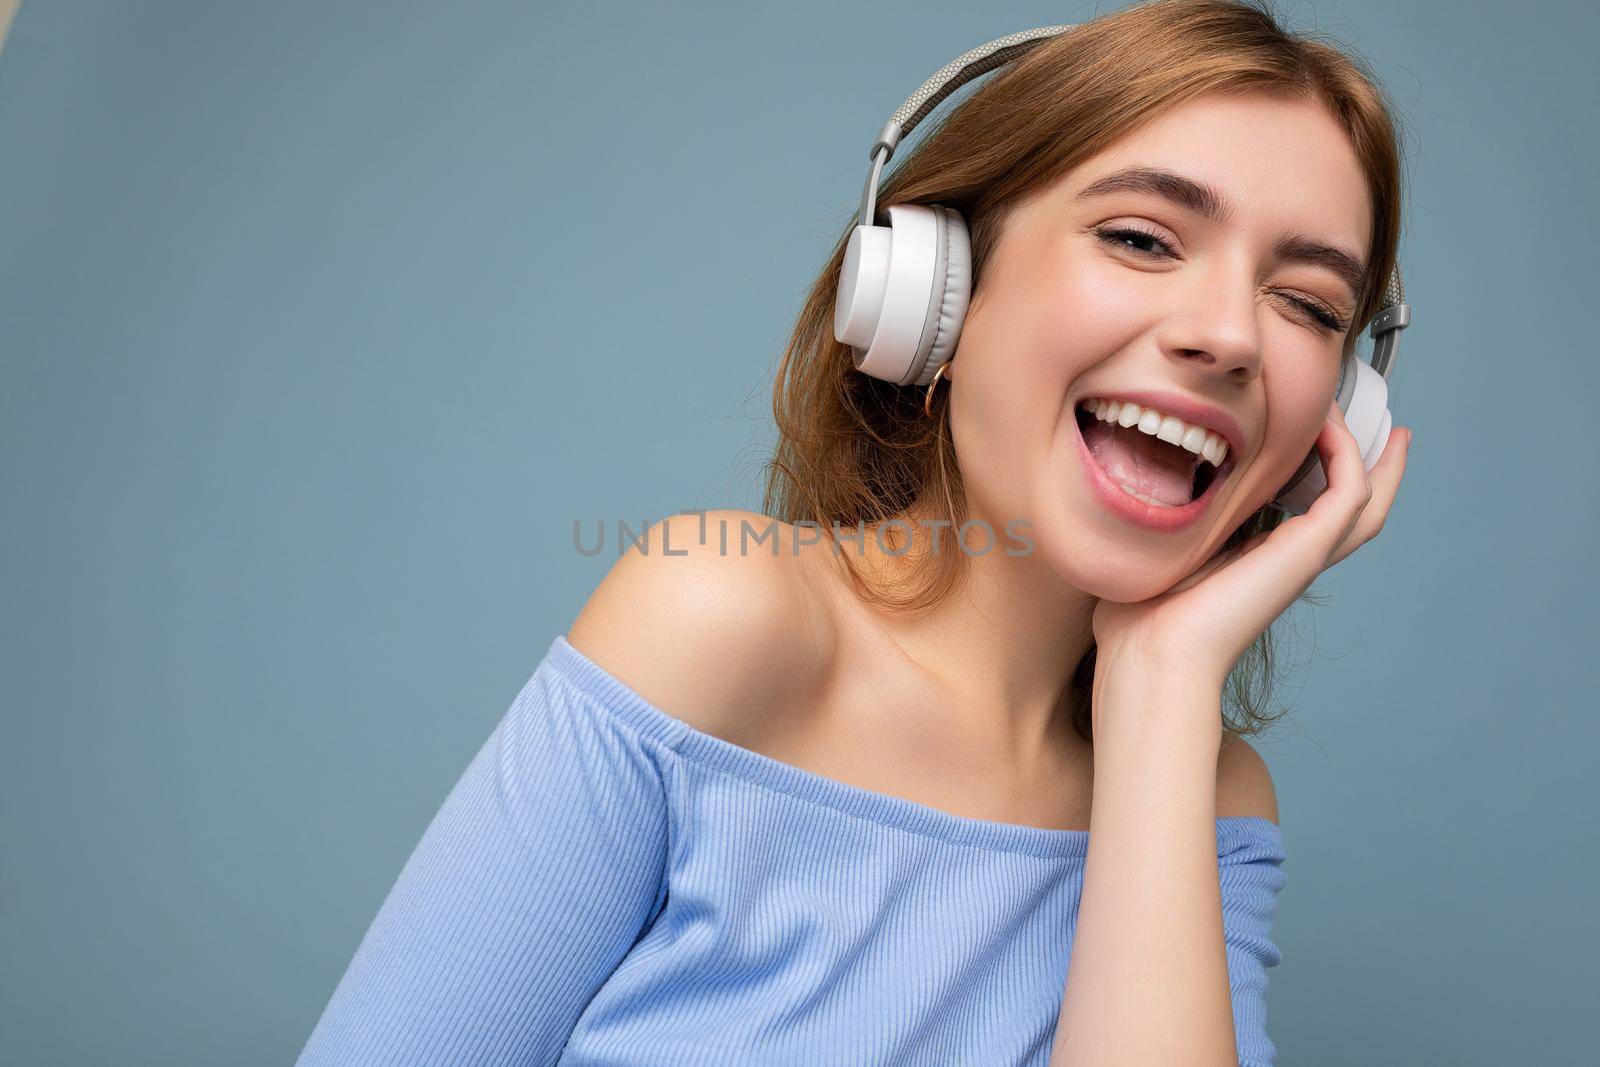 Closeup photo of attractive happy smiling young blonde woman wearing blue crop top isolated over blue background wall wearing headphones listening to music and having fun by TRMK